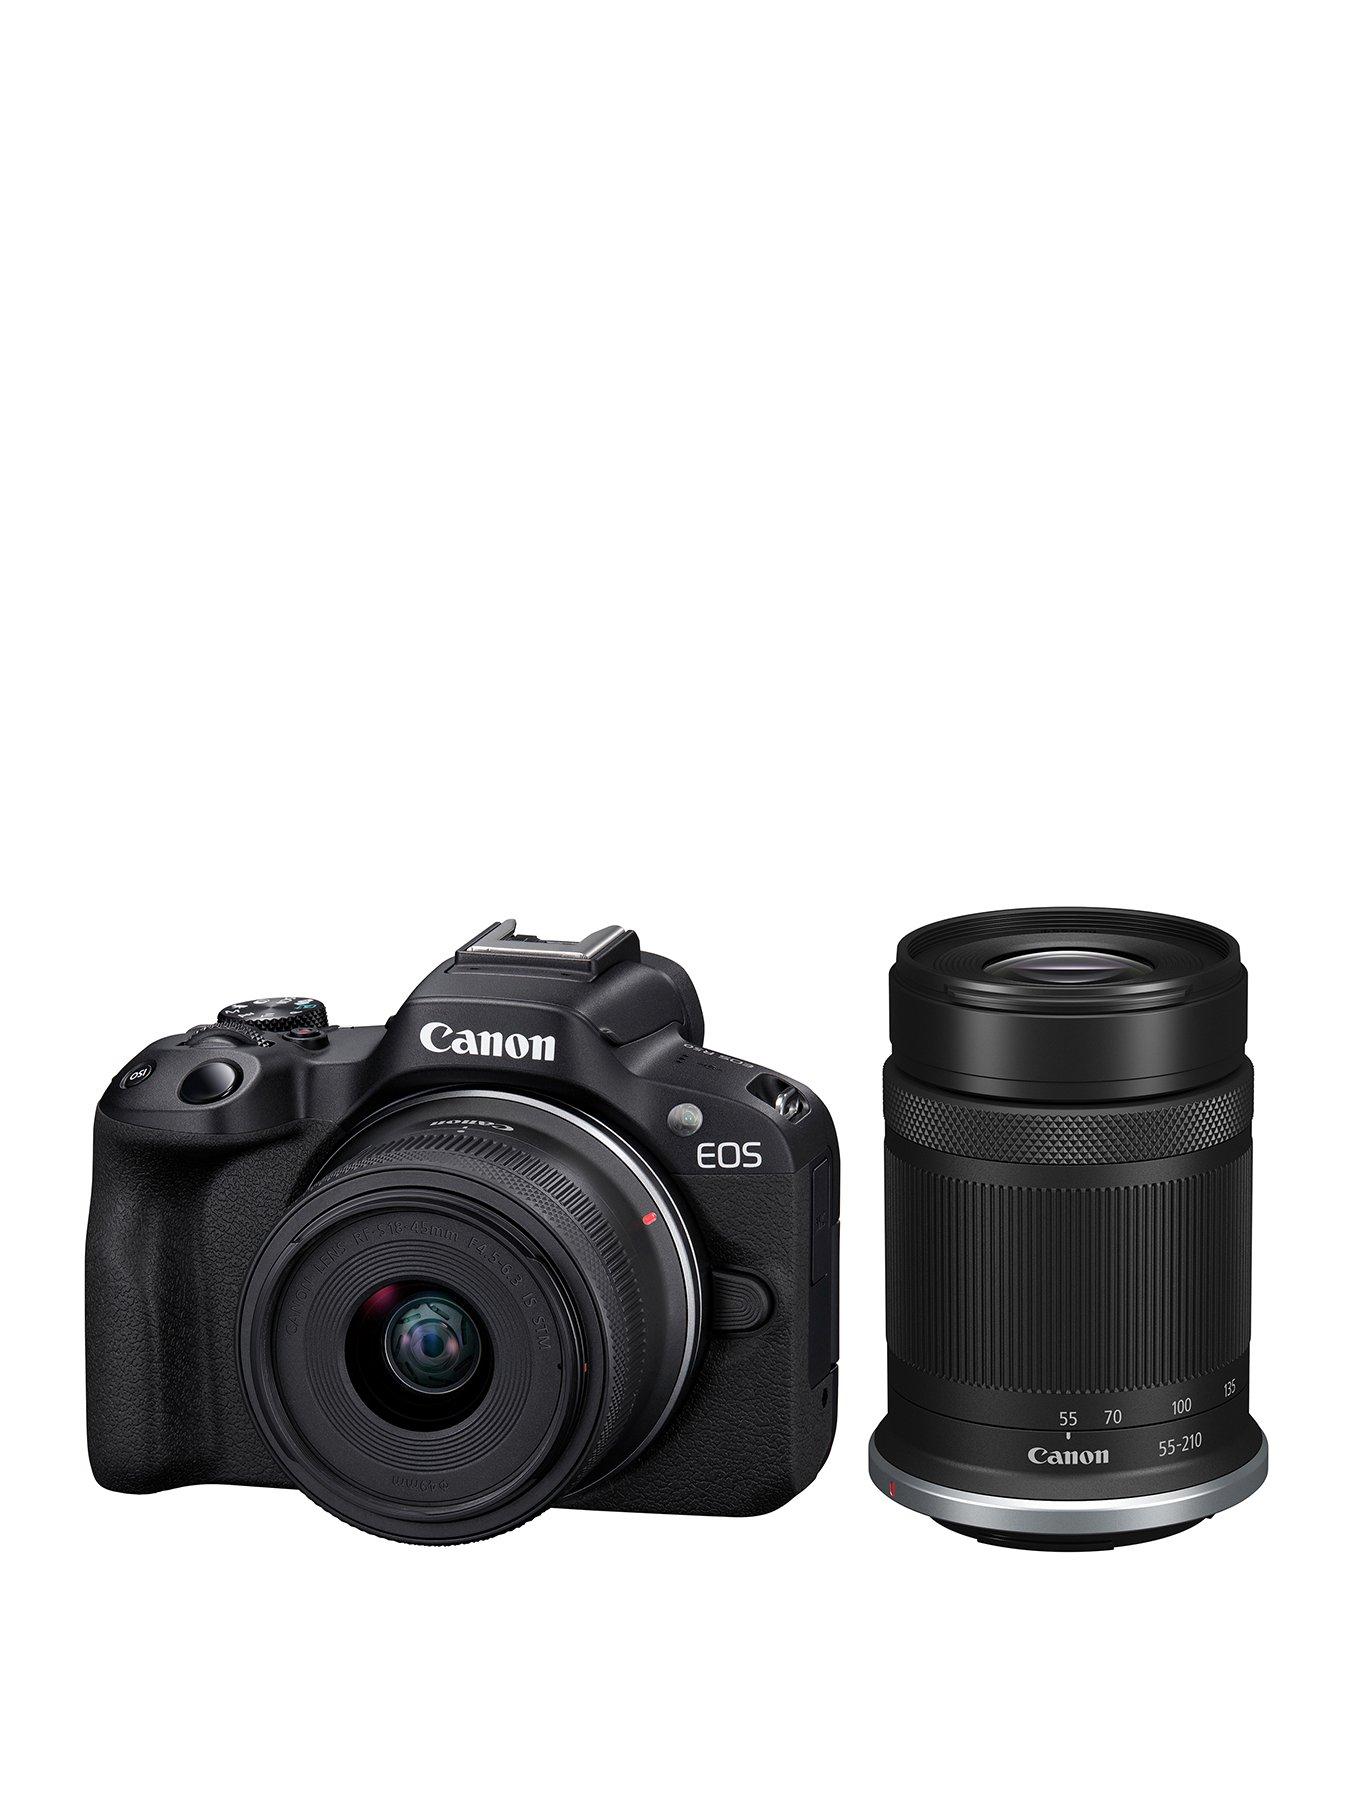 Canon EOS 2000D Digital SLR Camera with 18-55mm III DC Lens, 1080p Full HD,  24.1MP, Wi-Fi, NFC, Optical Viewfinder, 3 LCD Screen, Black